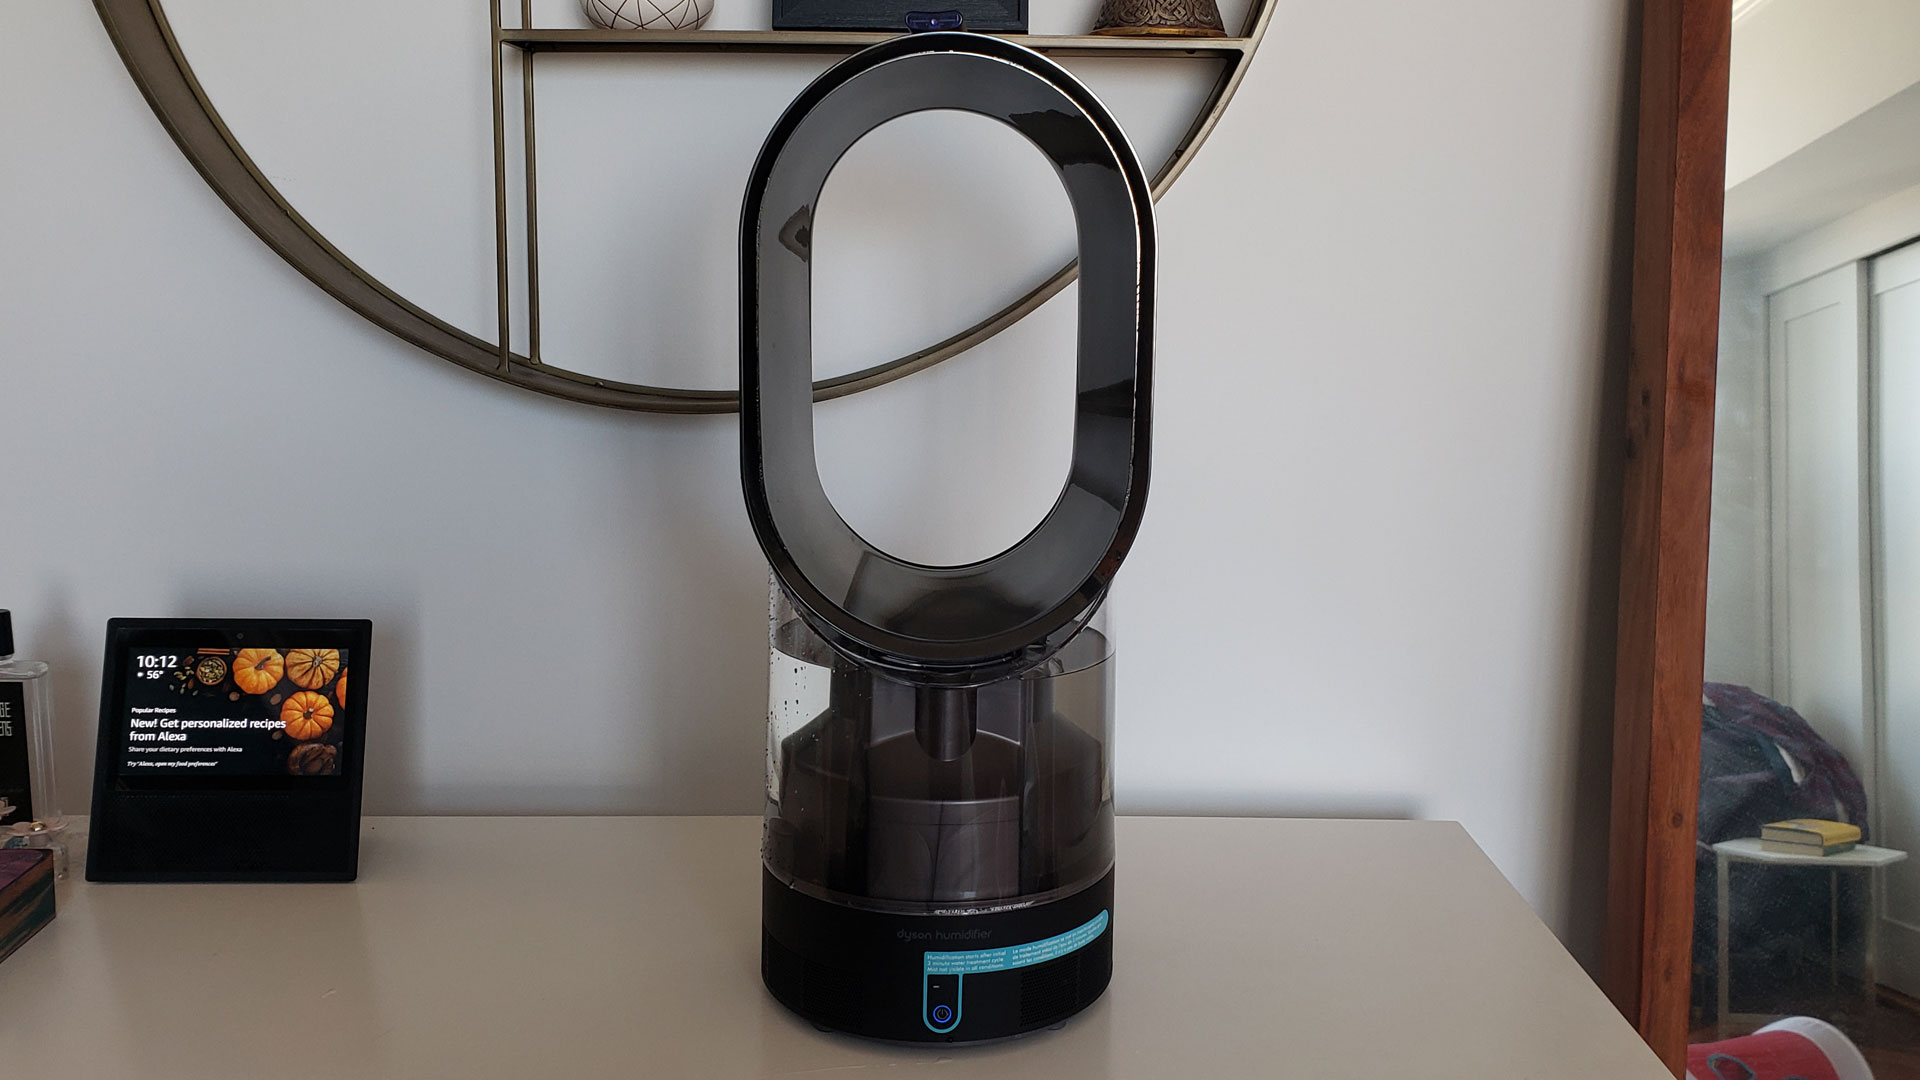 Dyson AM10 humidifier review: image shows Dyson AM10 humidifier humidifier